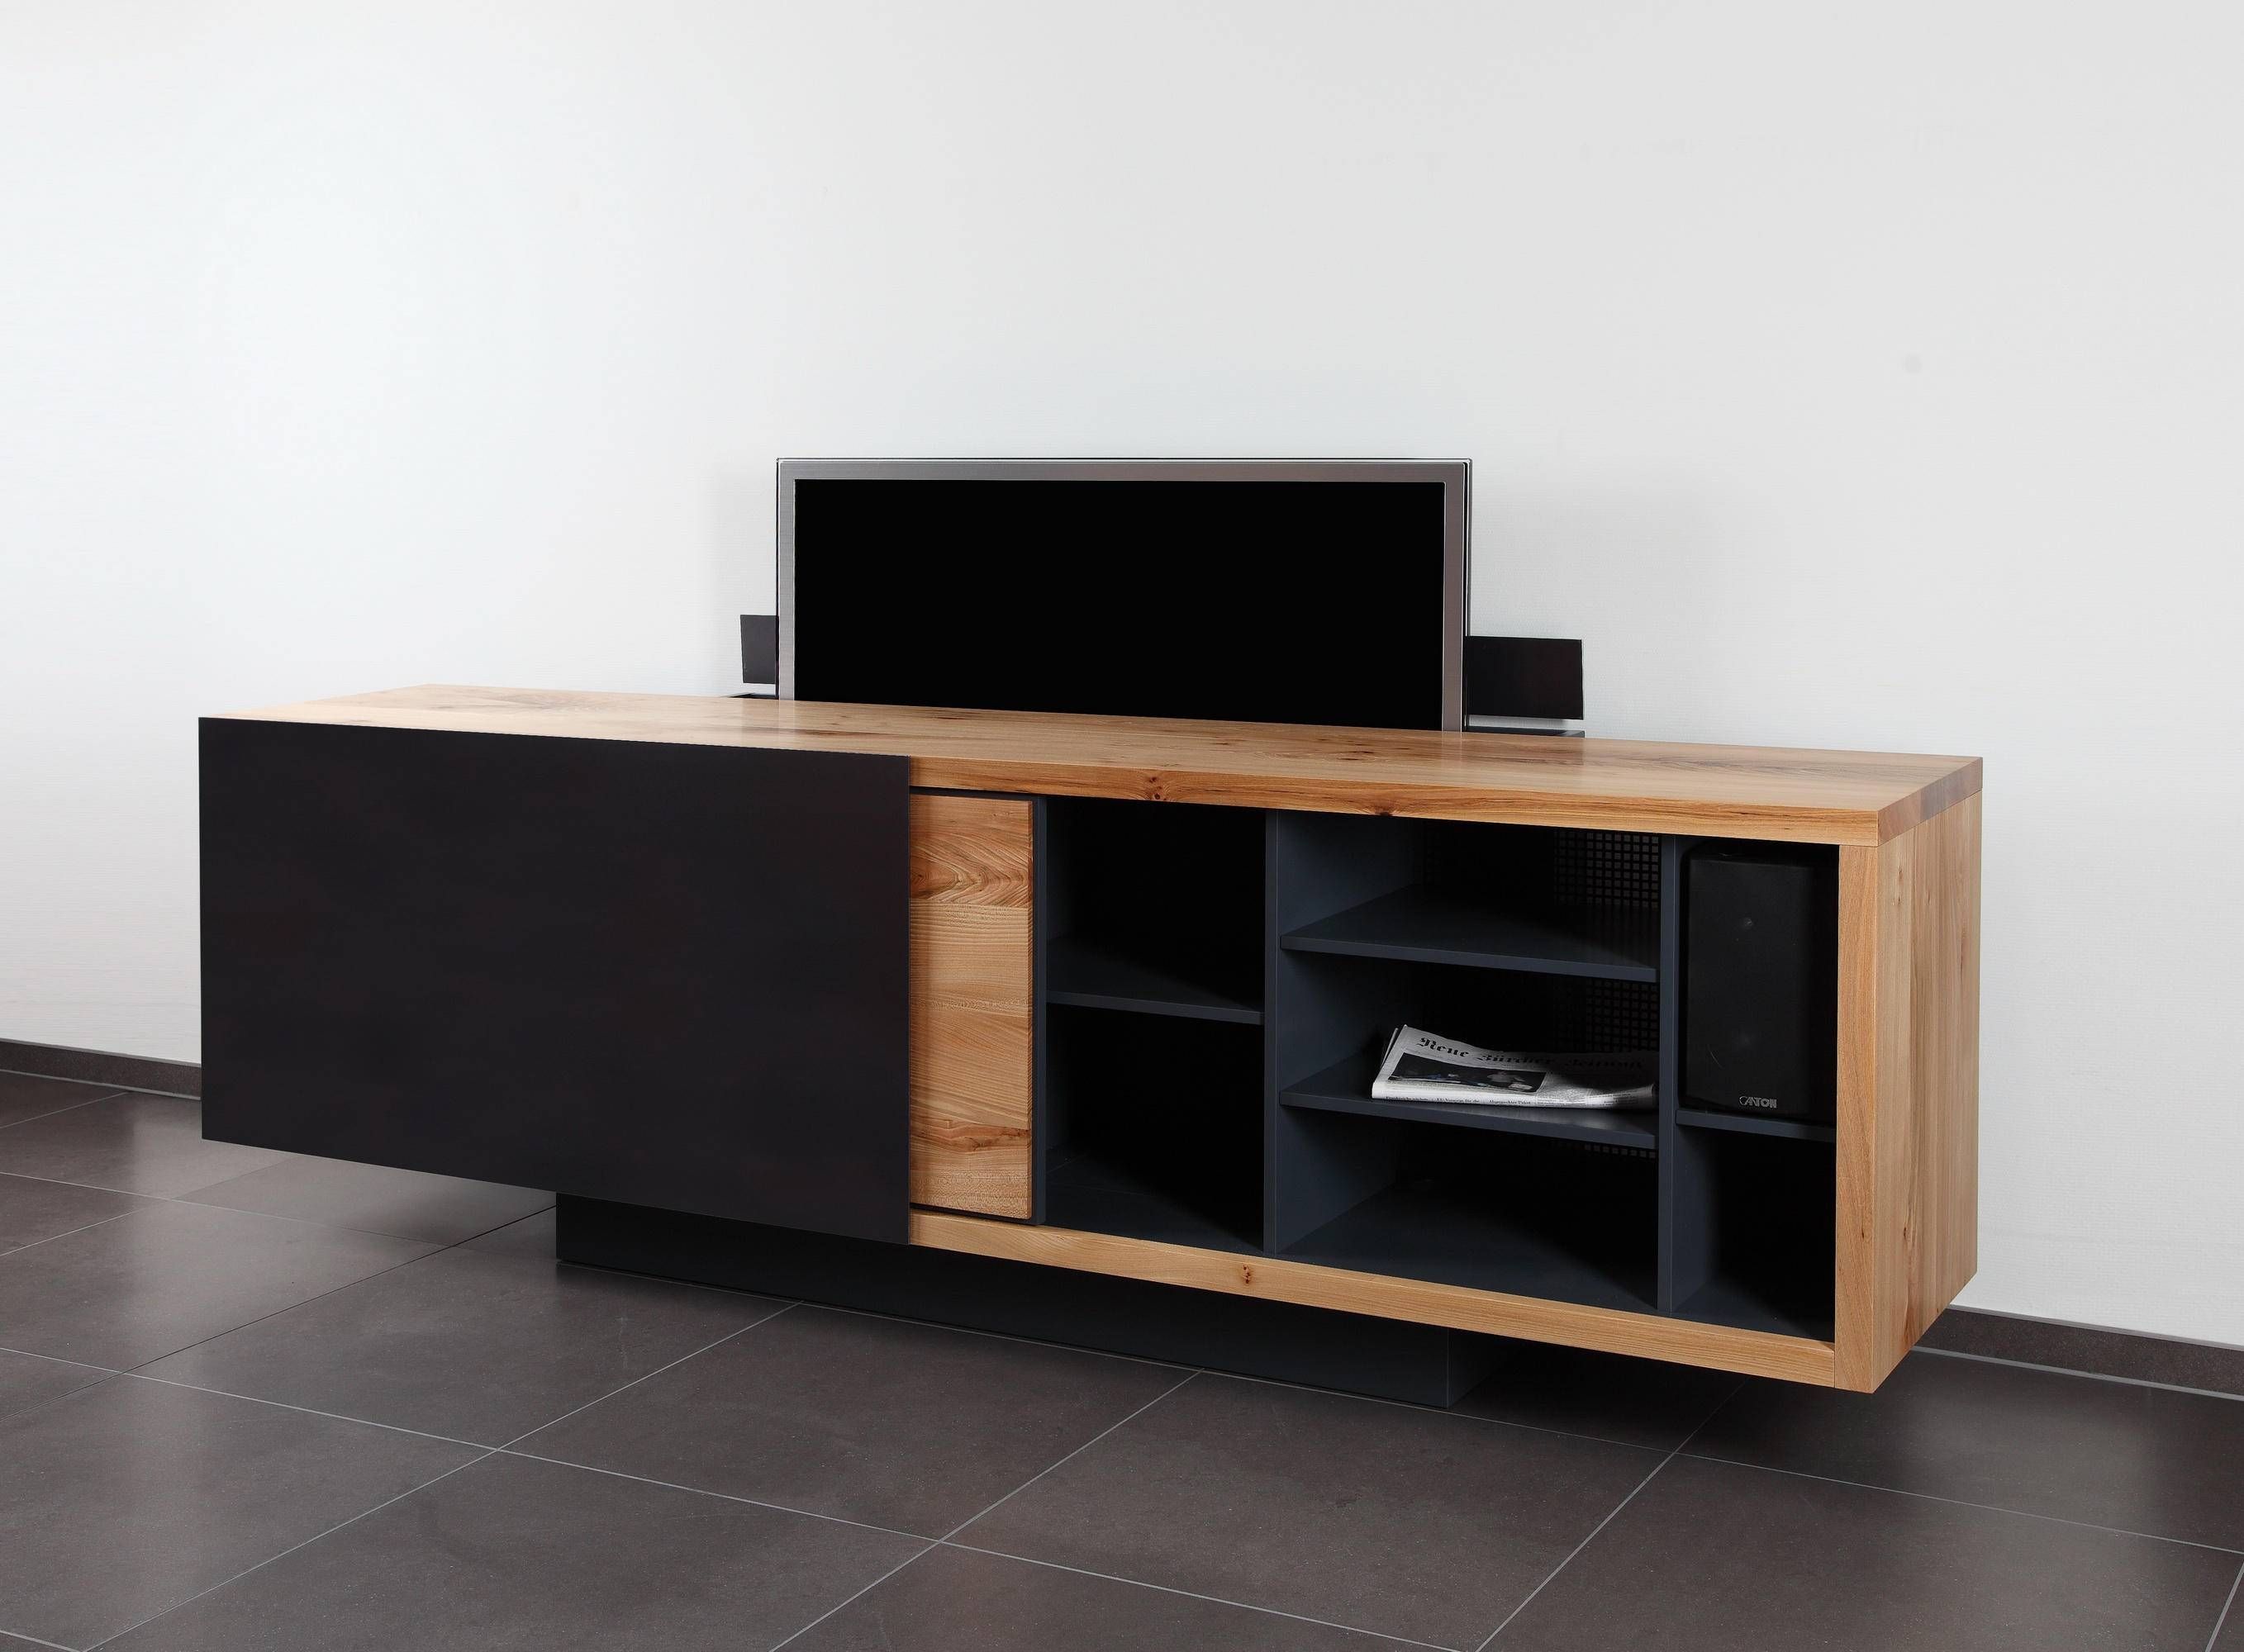 Ign. B2. Tv. Sideboard. – Multimedia Sideboards From Ign (View 6 of 20)